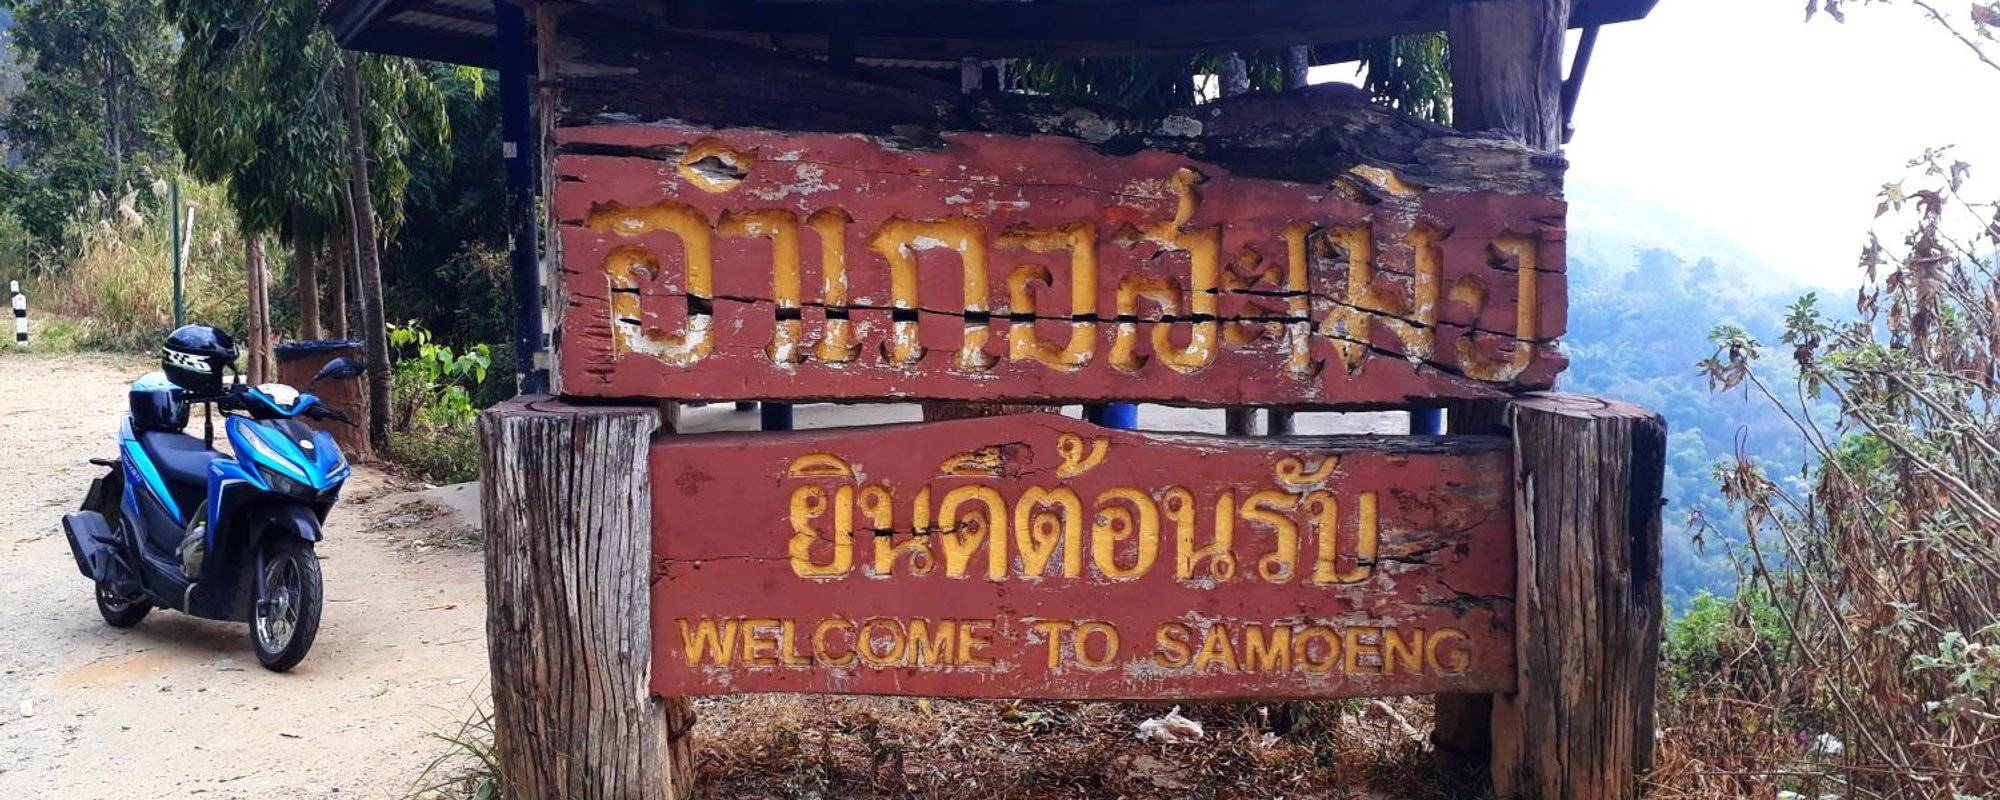 Travel Pro Adventure #44: The Someong Loop, Chiang Mai Thailand! Part Two (9 photos)